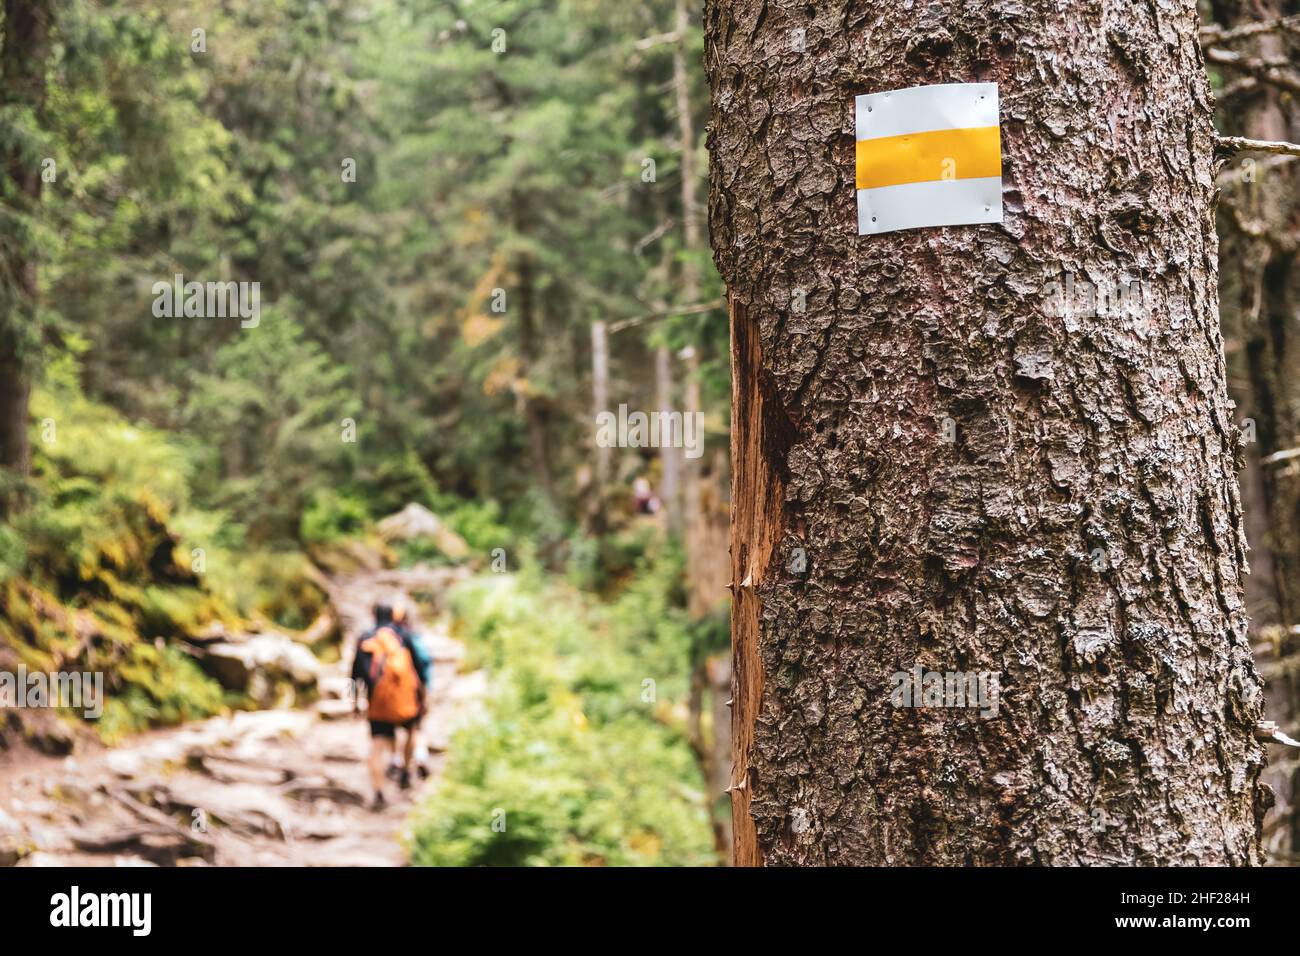 Tourist sign on the tree with a group of tourists on the pathway in the forest. Hiking in summer concept. Stock Photo